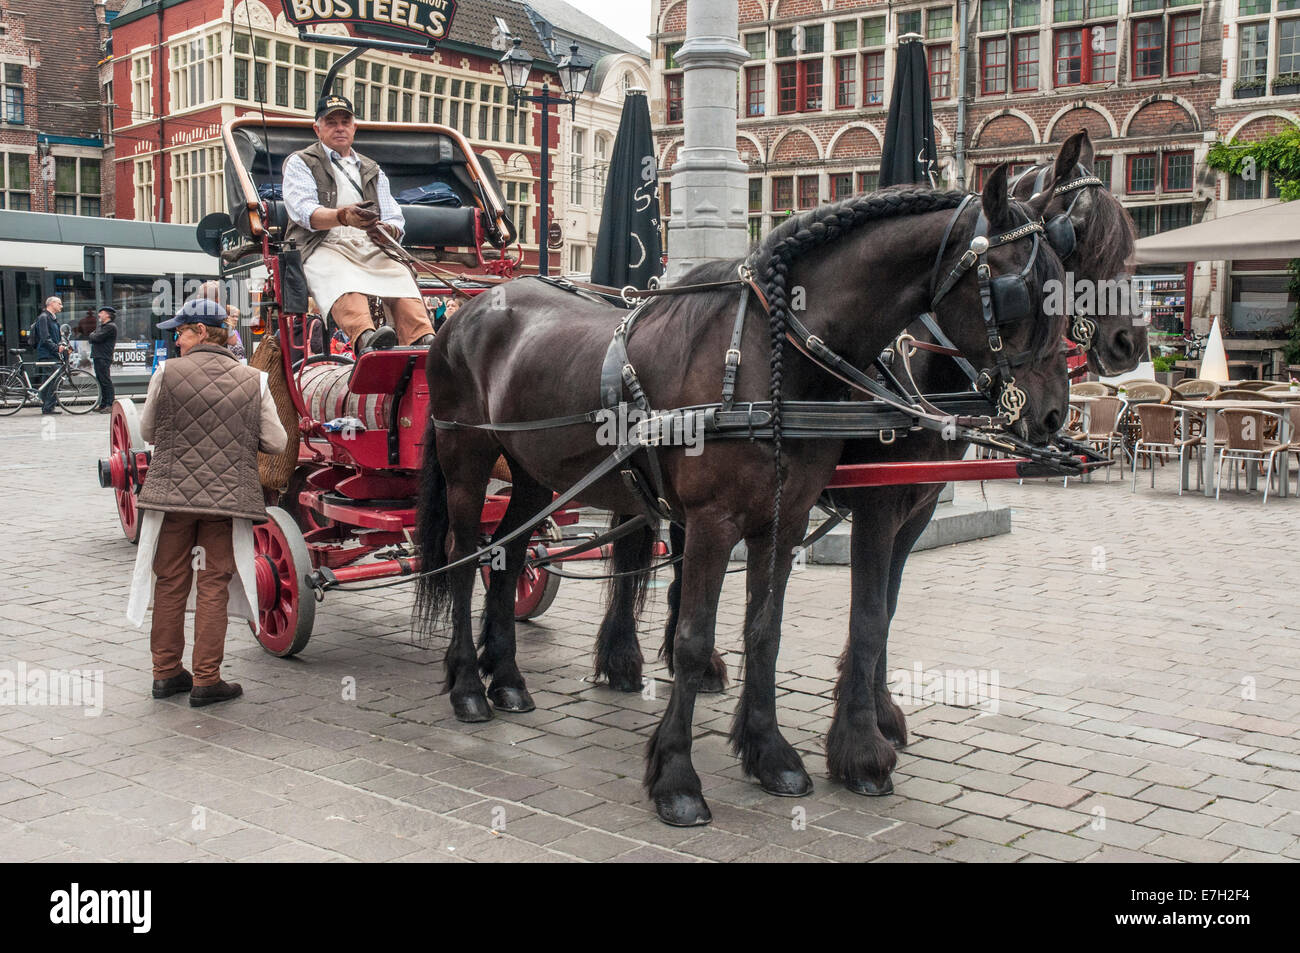 Horse-drawn brewery carriage, Ghent, Belgium Stock Photo